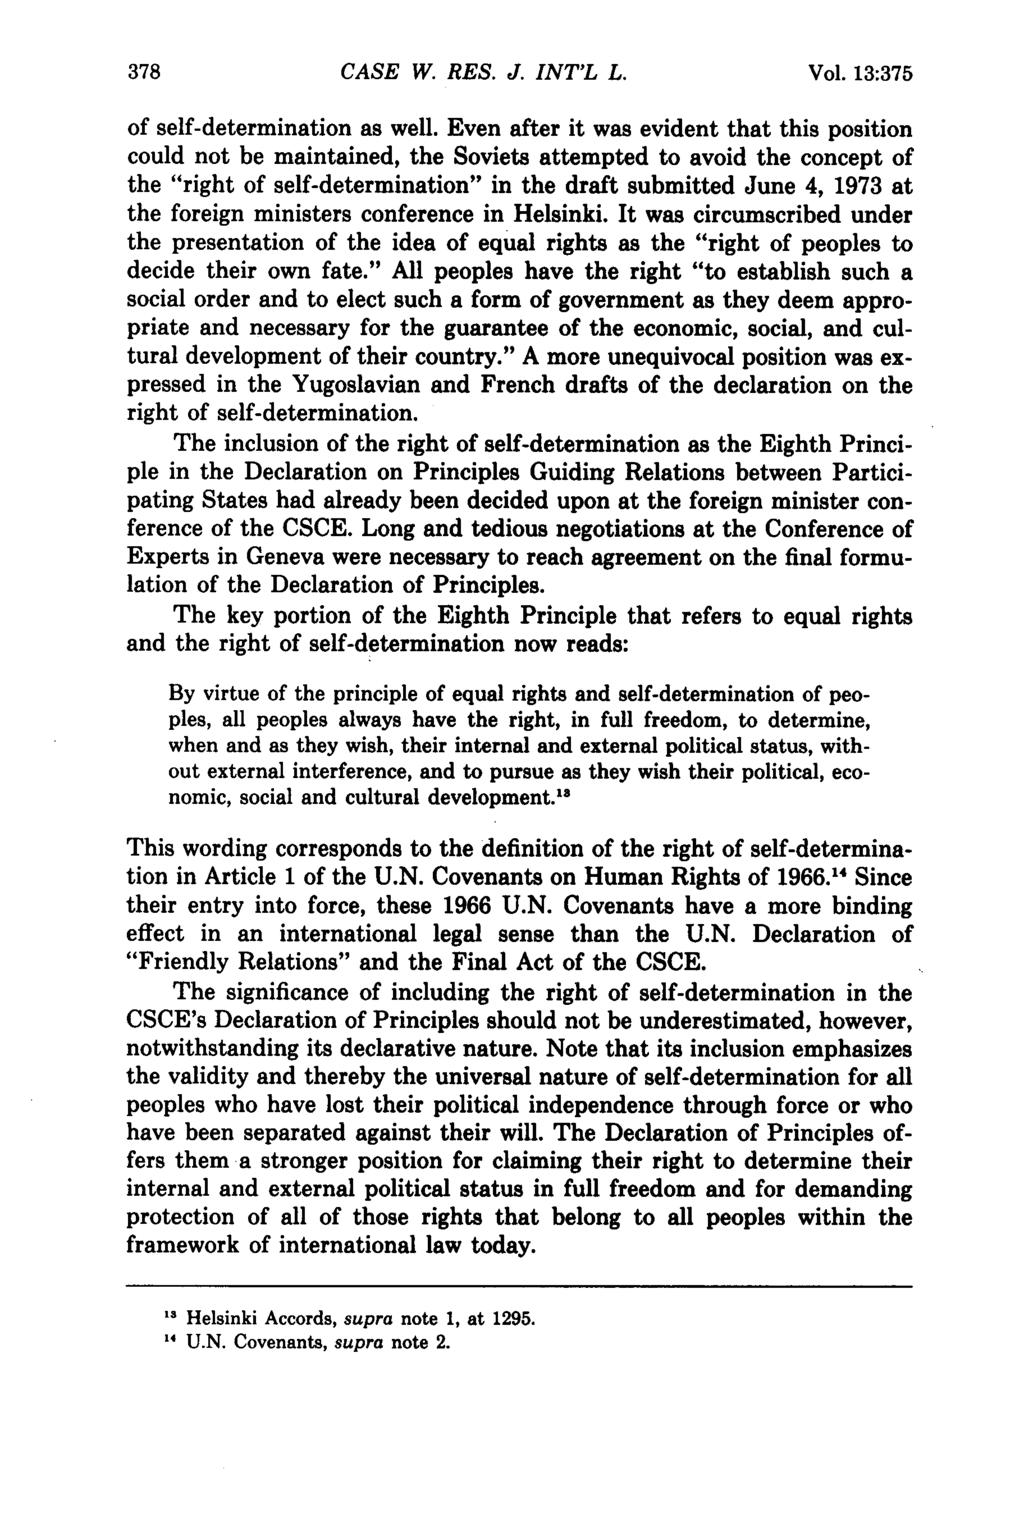 CASE W. RES. J. INT'L L. Vol. 13:375 of self-determination as well.